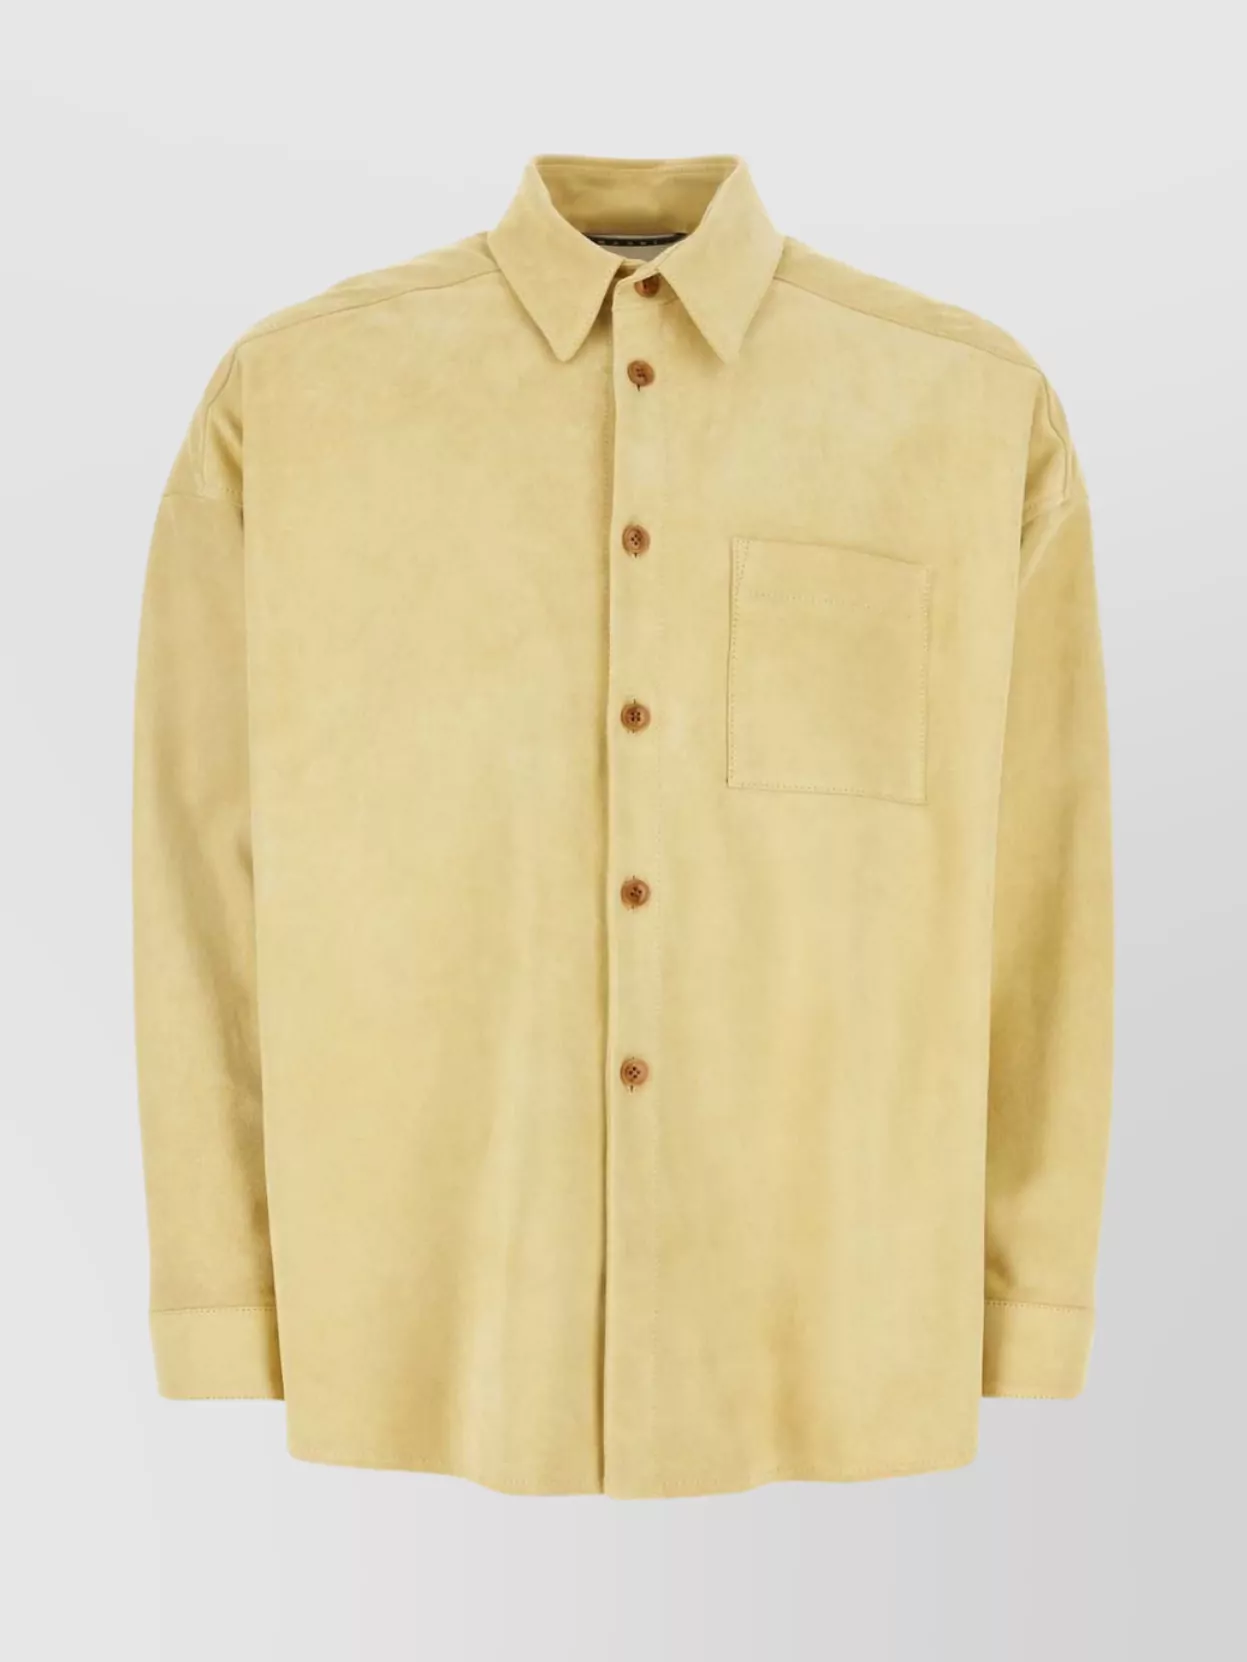 Marni Soft Suede Shirt Chest Pocket In Neutral